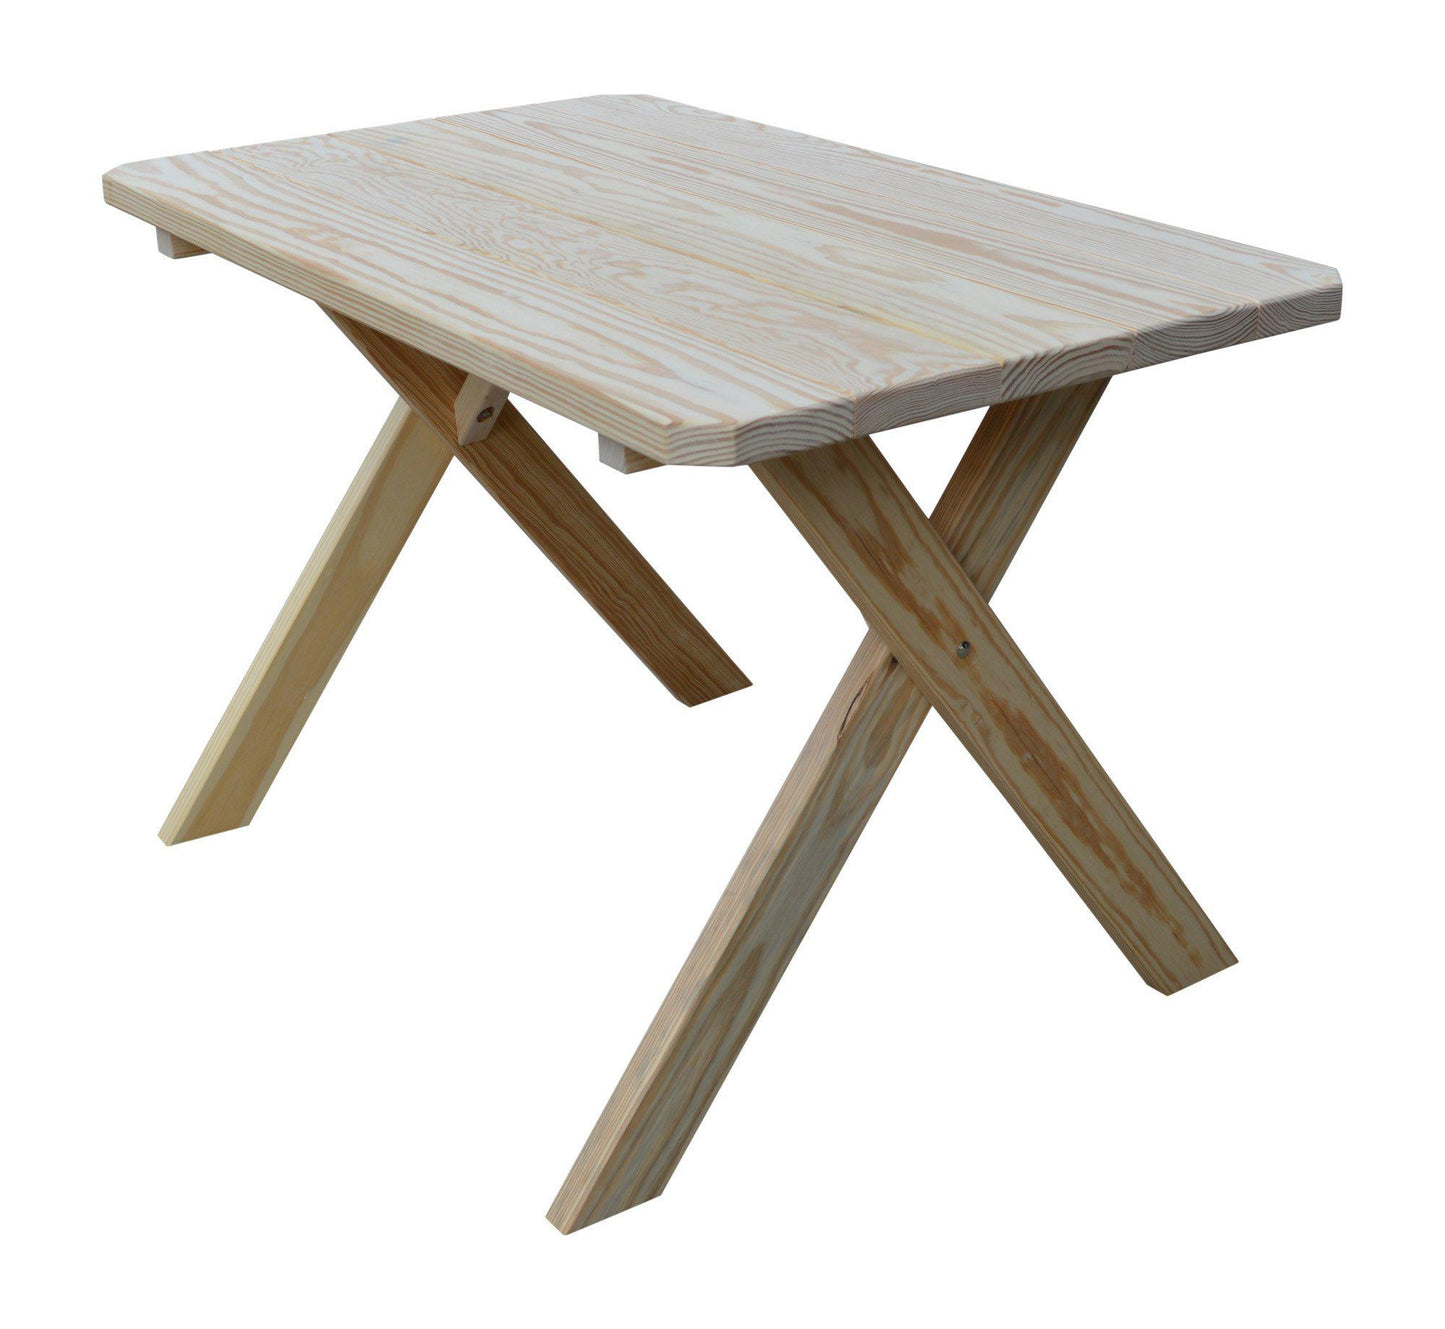 A&L Furniture Co. Pressure Treated Pine 5' Cross-leg Table Only - LEAD TIME TO SHIP 10 BUSINESS DAYS